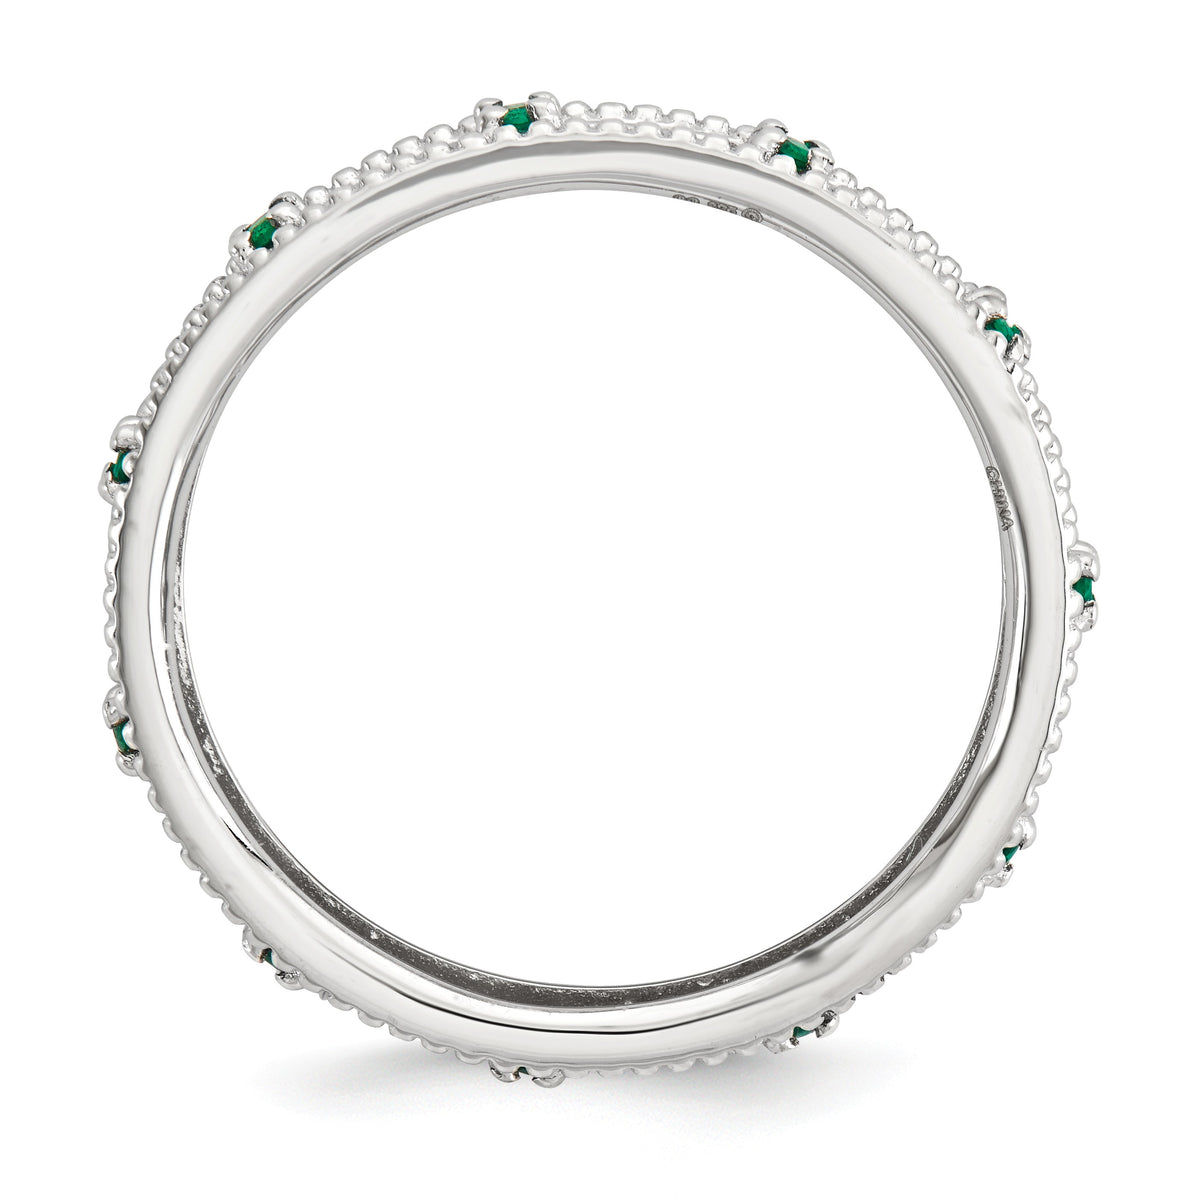 Alternate view of the 3mm Sterling Silver Stackable Expressions Created Emerald Scroll Band by The Black Bow Jewelry Co.